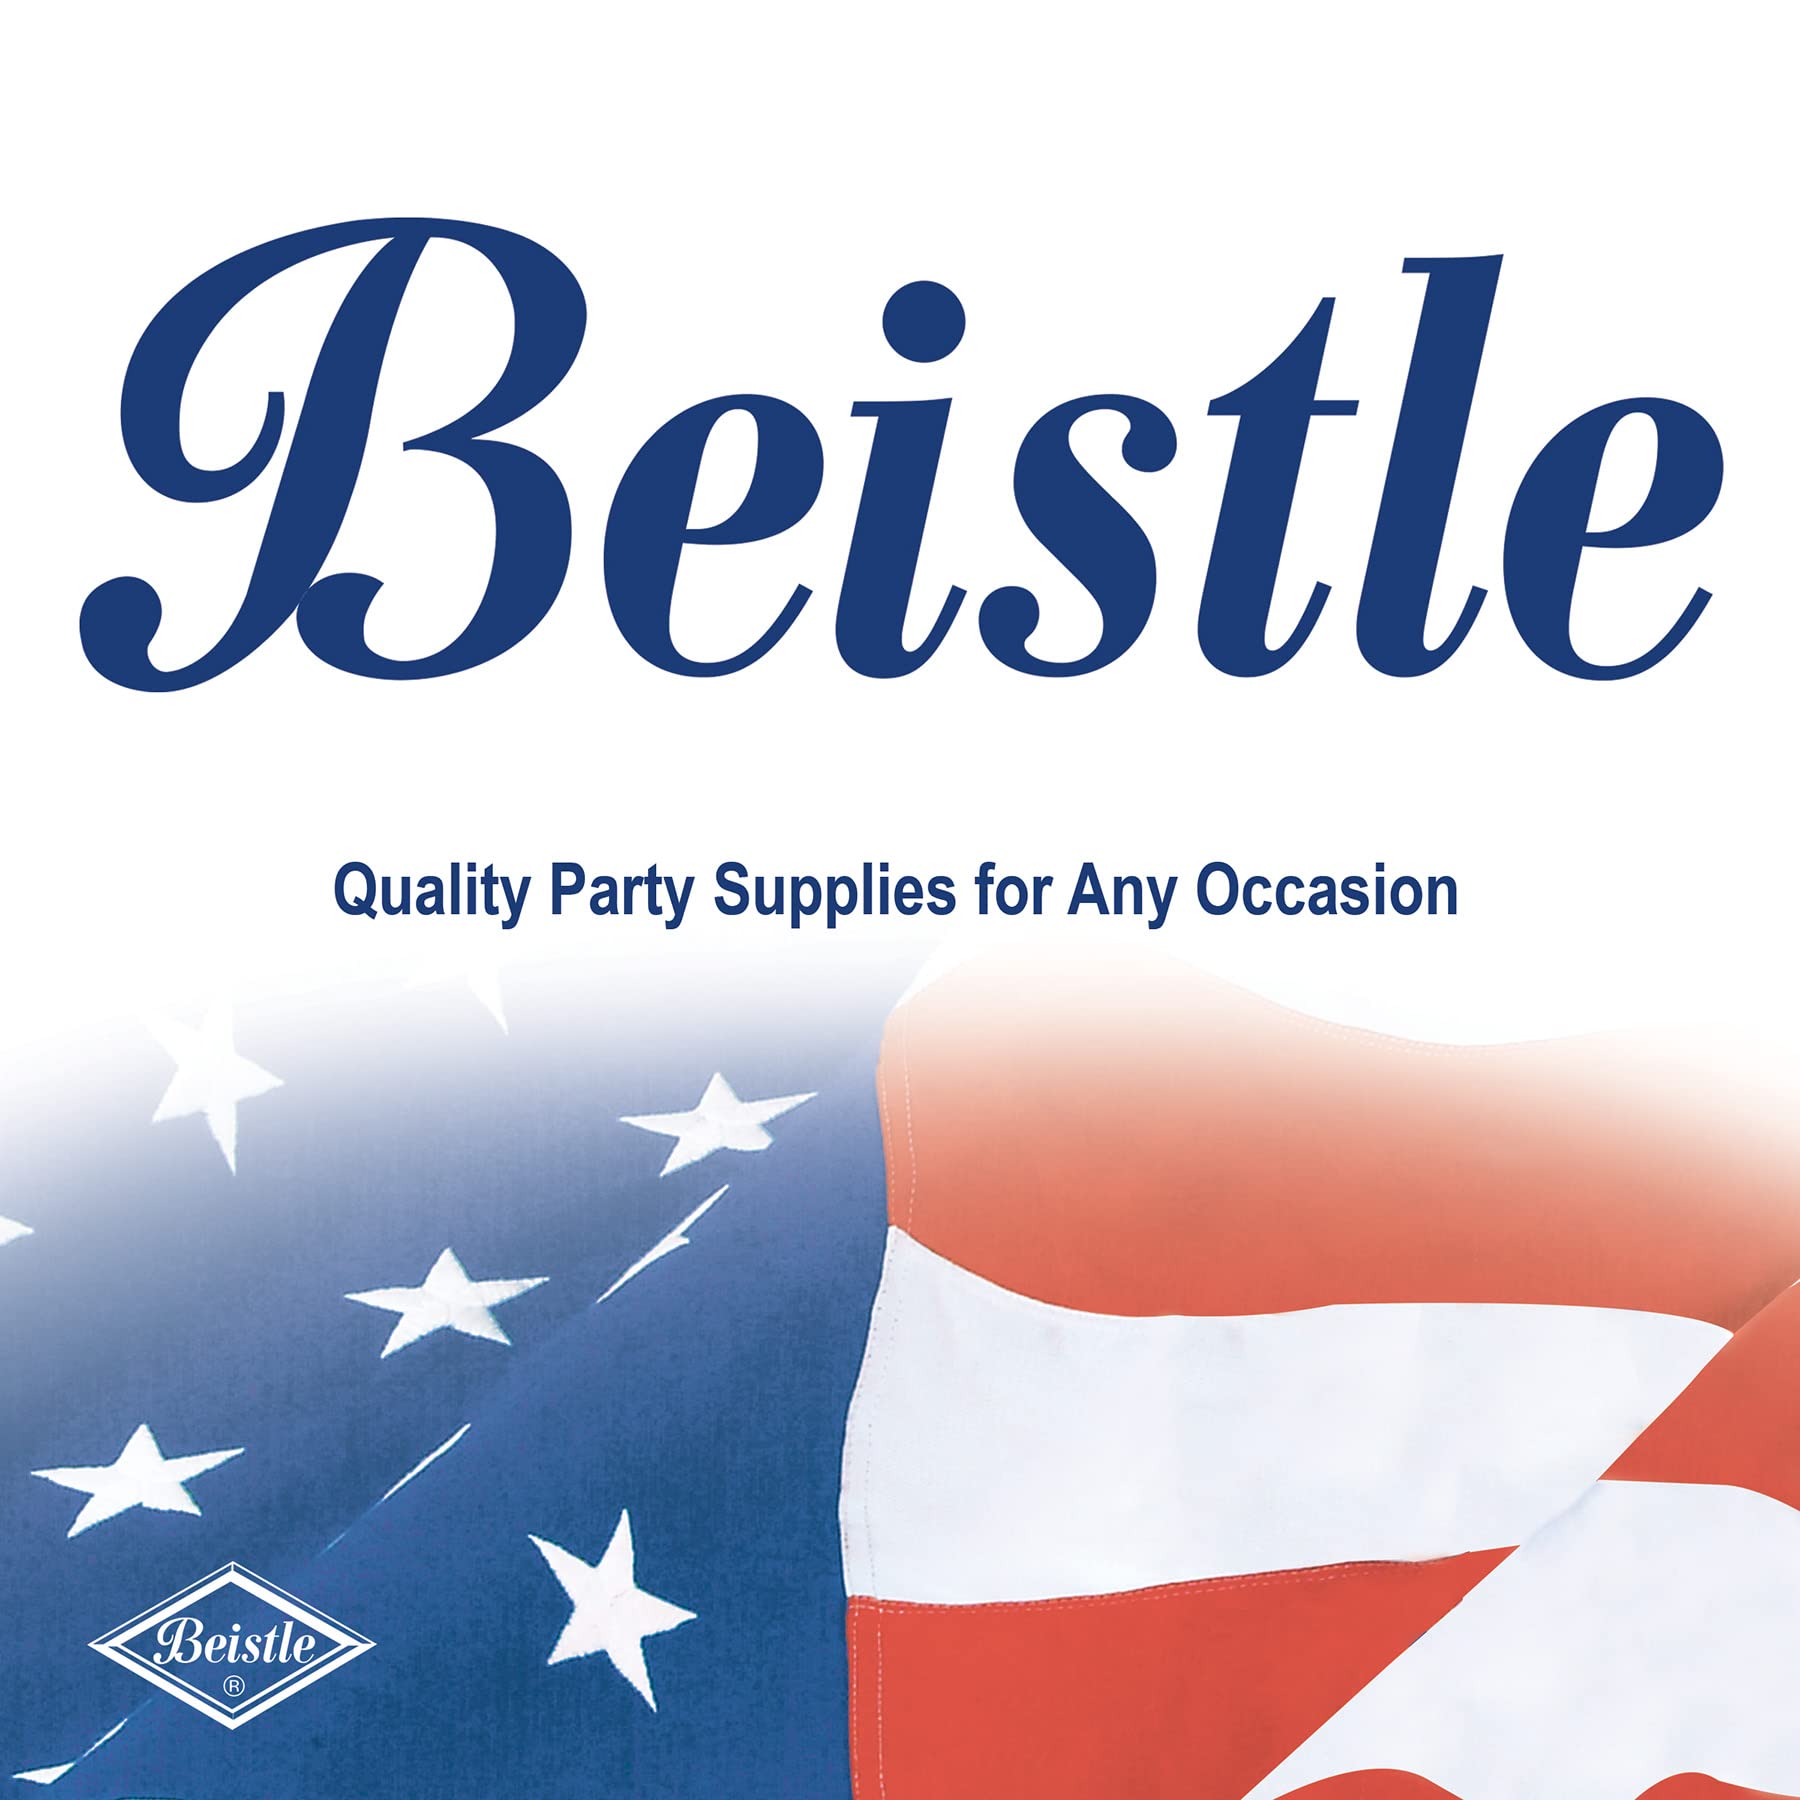 Beistle quality party supplies for any occassion